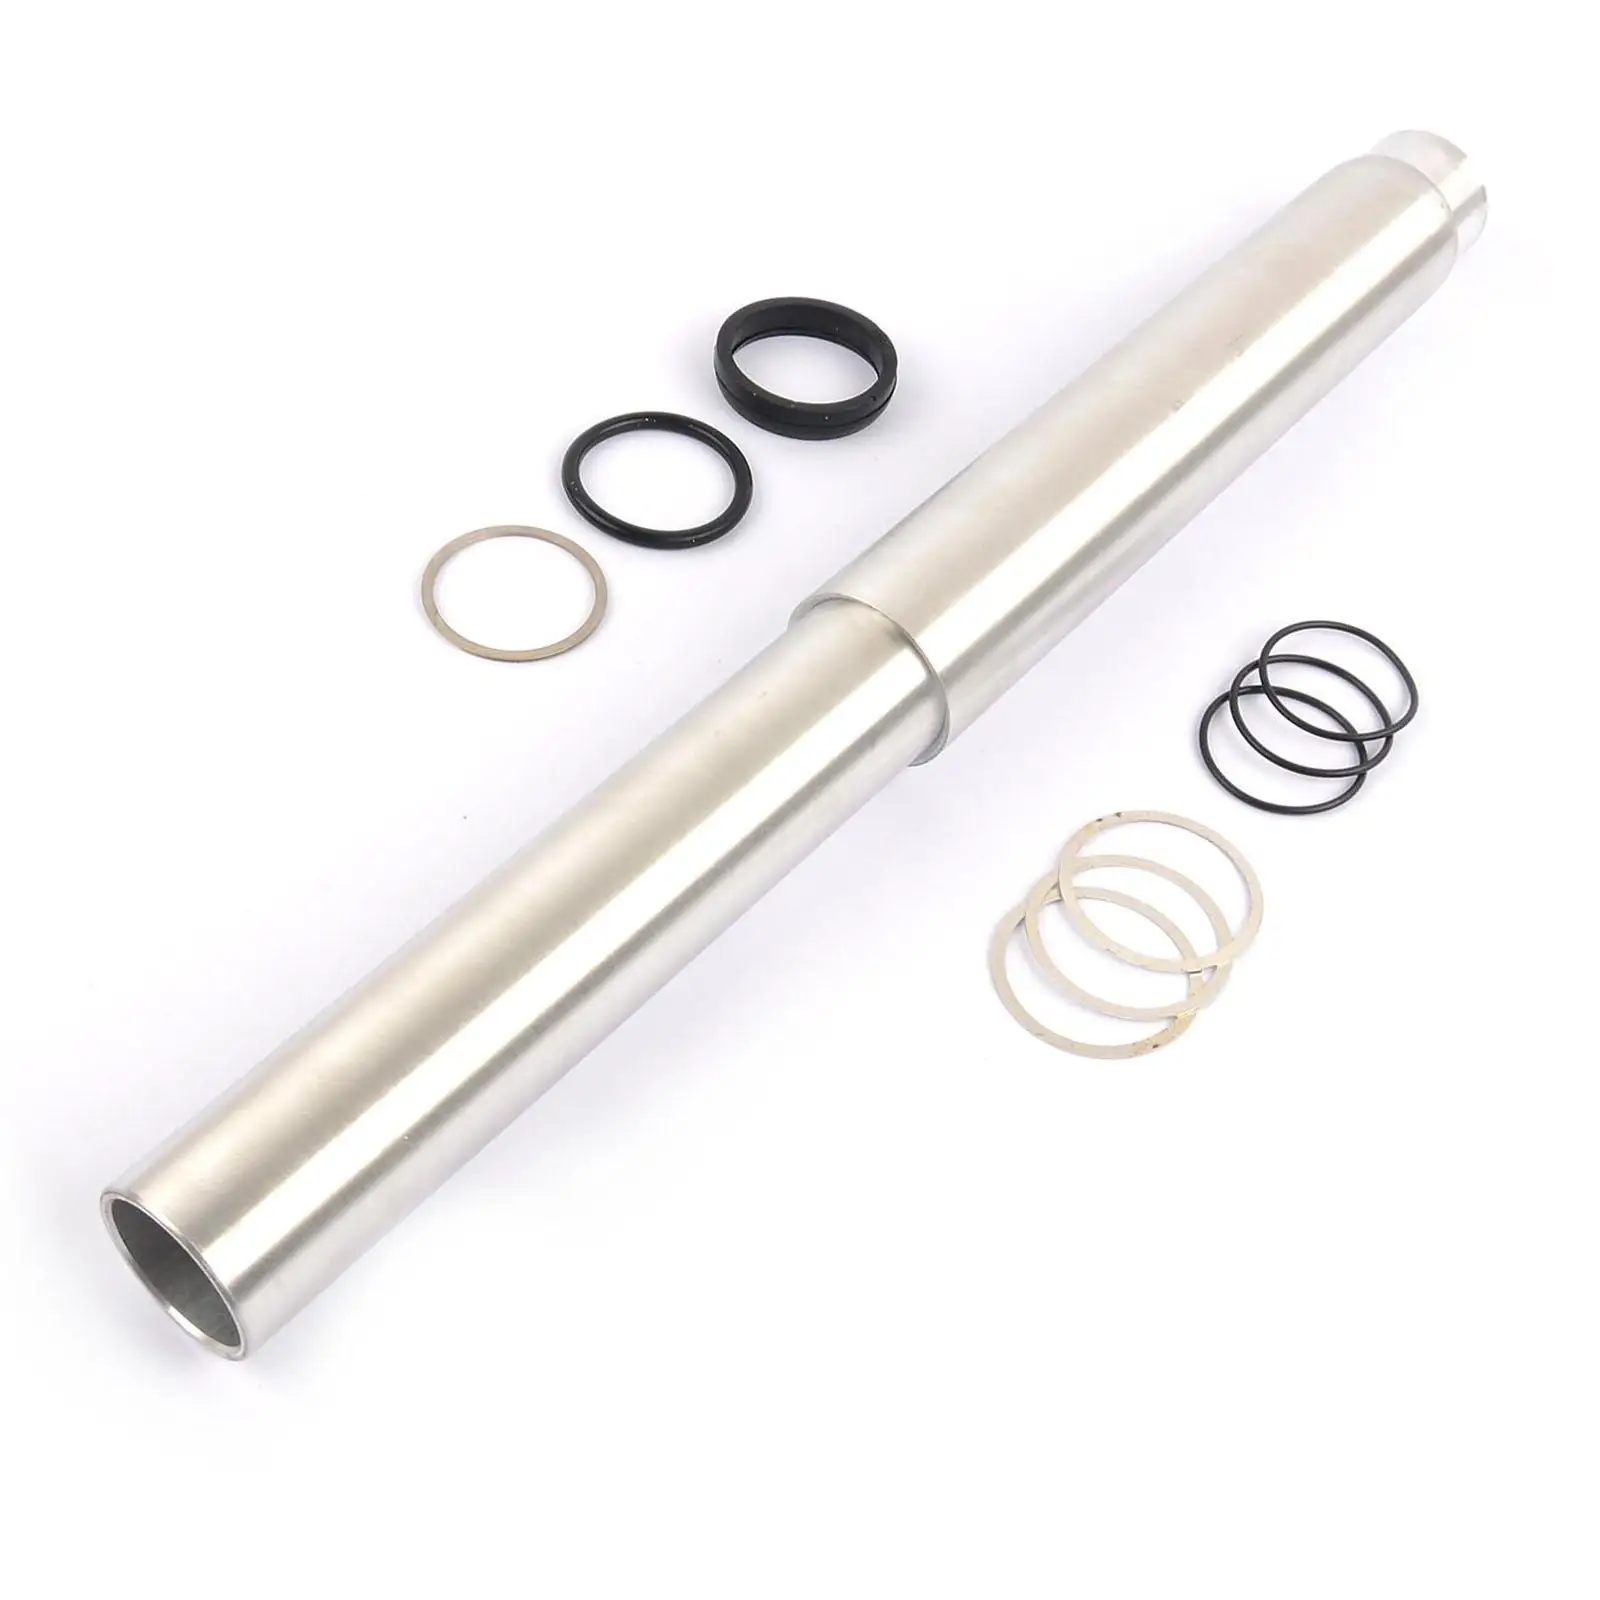 Collapsible Coolant Water Pipe Set Parts Car Tube for BMW 7 E65 E66 E67